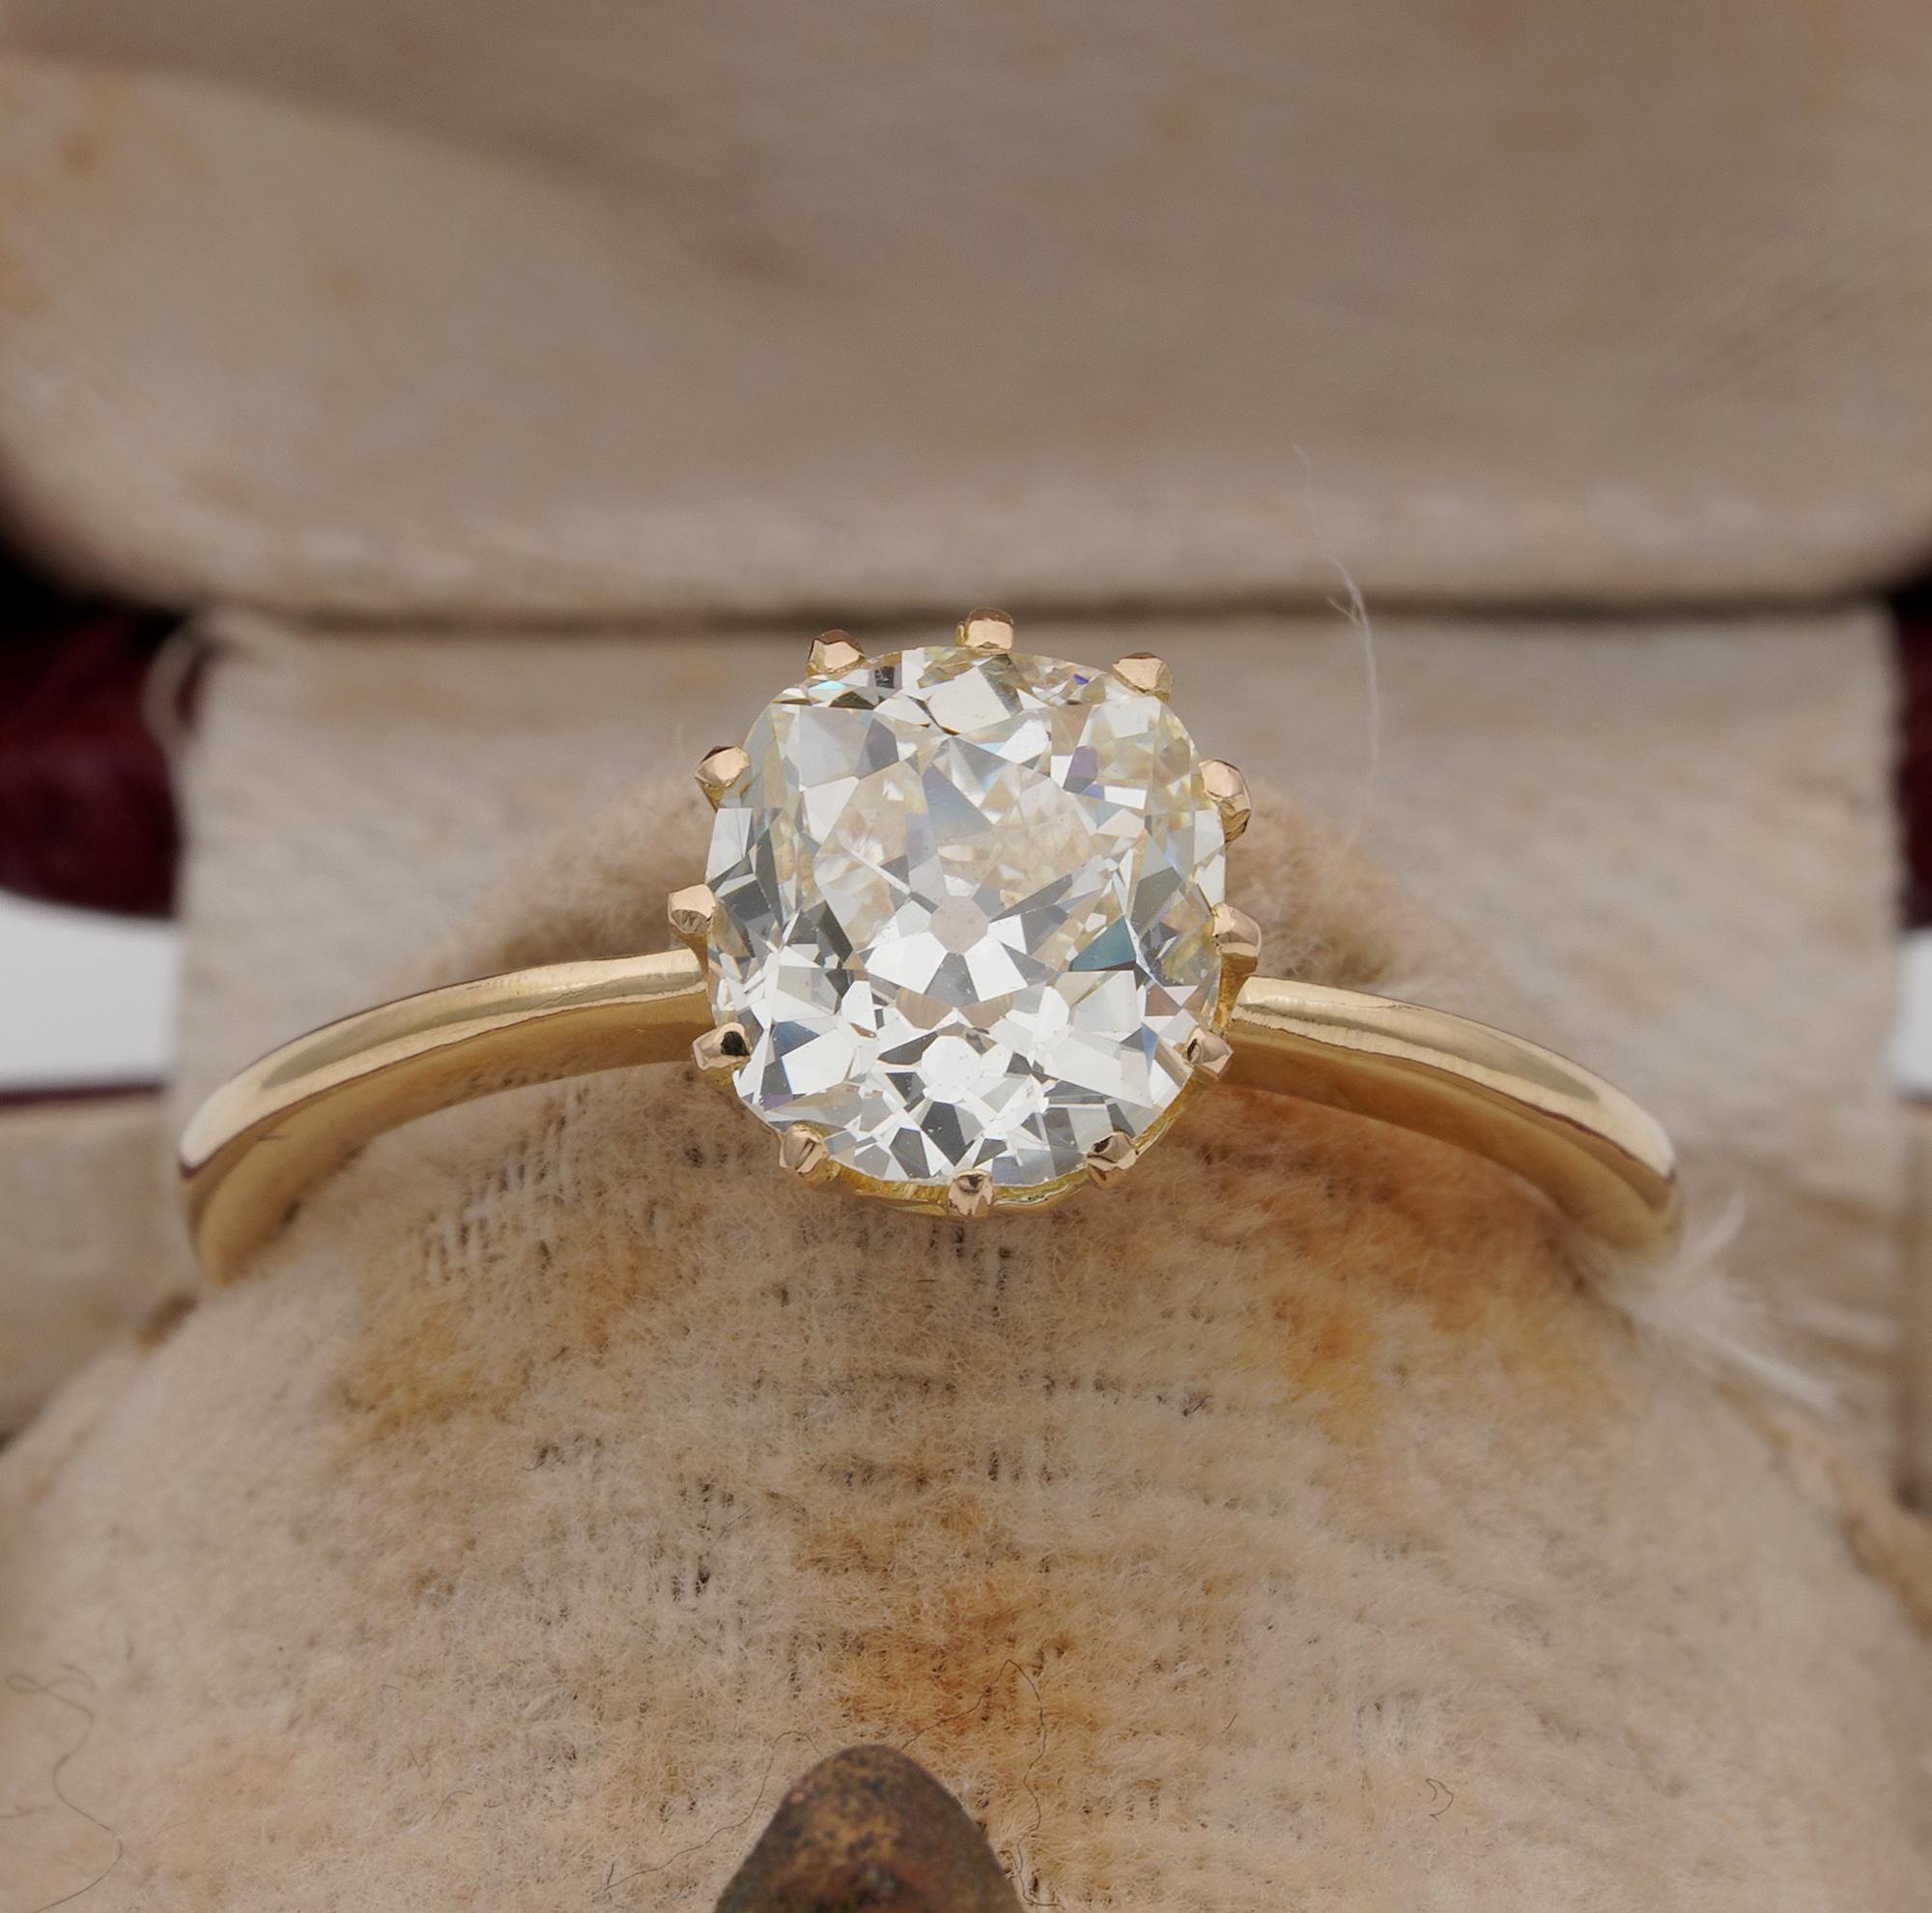 For Ever

This extra -ordinary Victorian period Diamond solitaire ring is 1900 ca-
Simple multi prongs Victorian setting yet between the most elegant antique style to hold such a beautiful Diamond to show off for ever
Mounting is solid 18 KT gold –